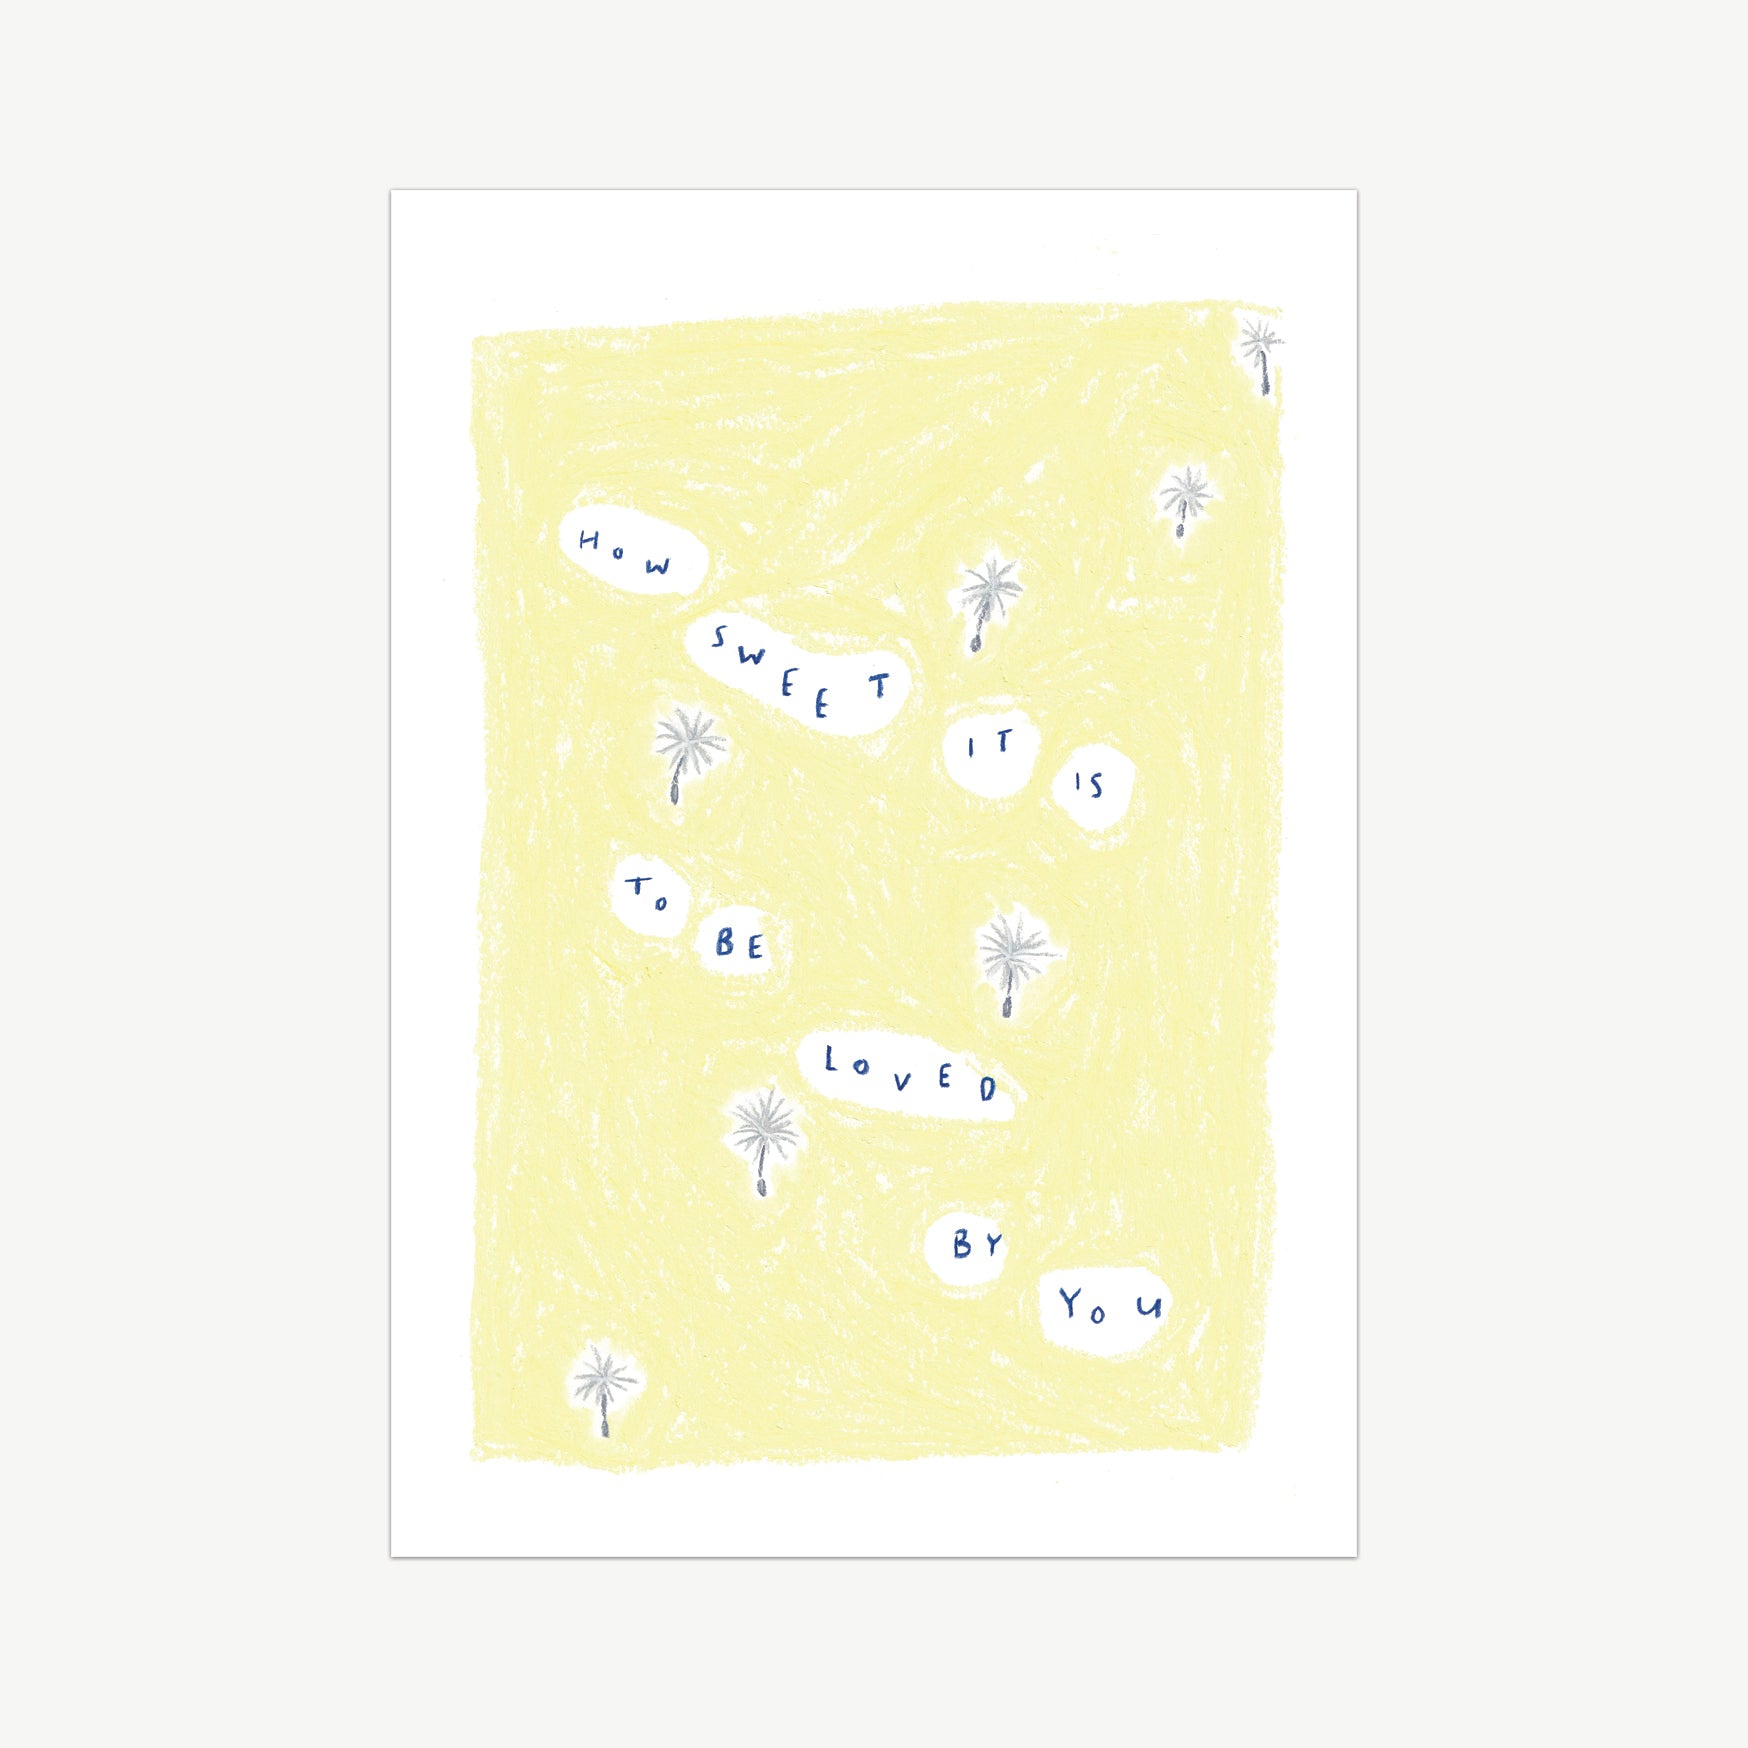 Illustrated print of dandelion seeds floating through the air, along with the words 'how sweet it is to be loved by you' written in dark blue with a yellow background, drawn in pastel pencil